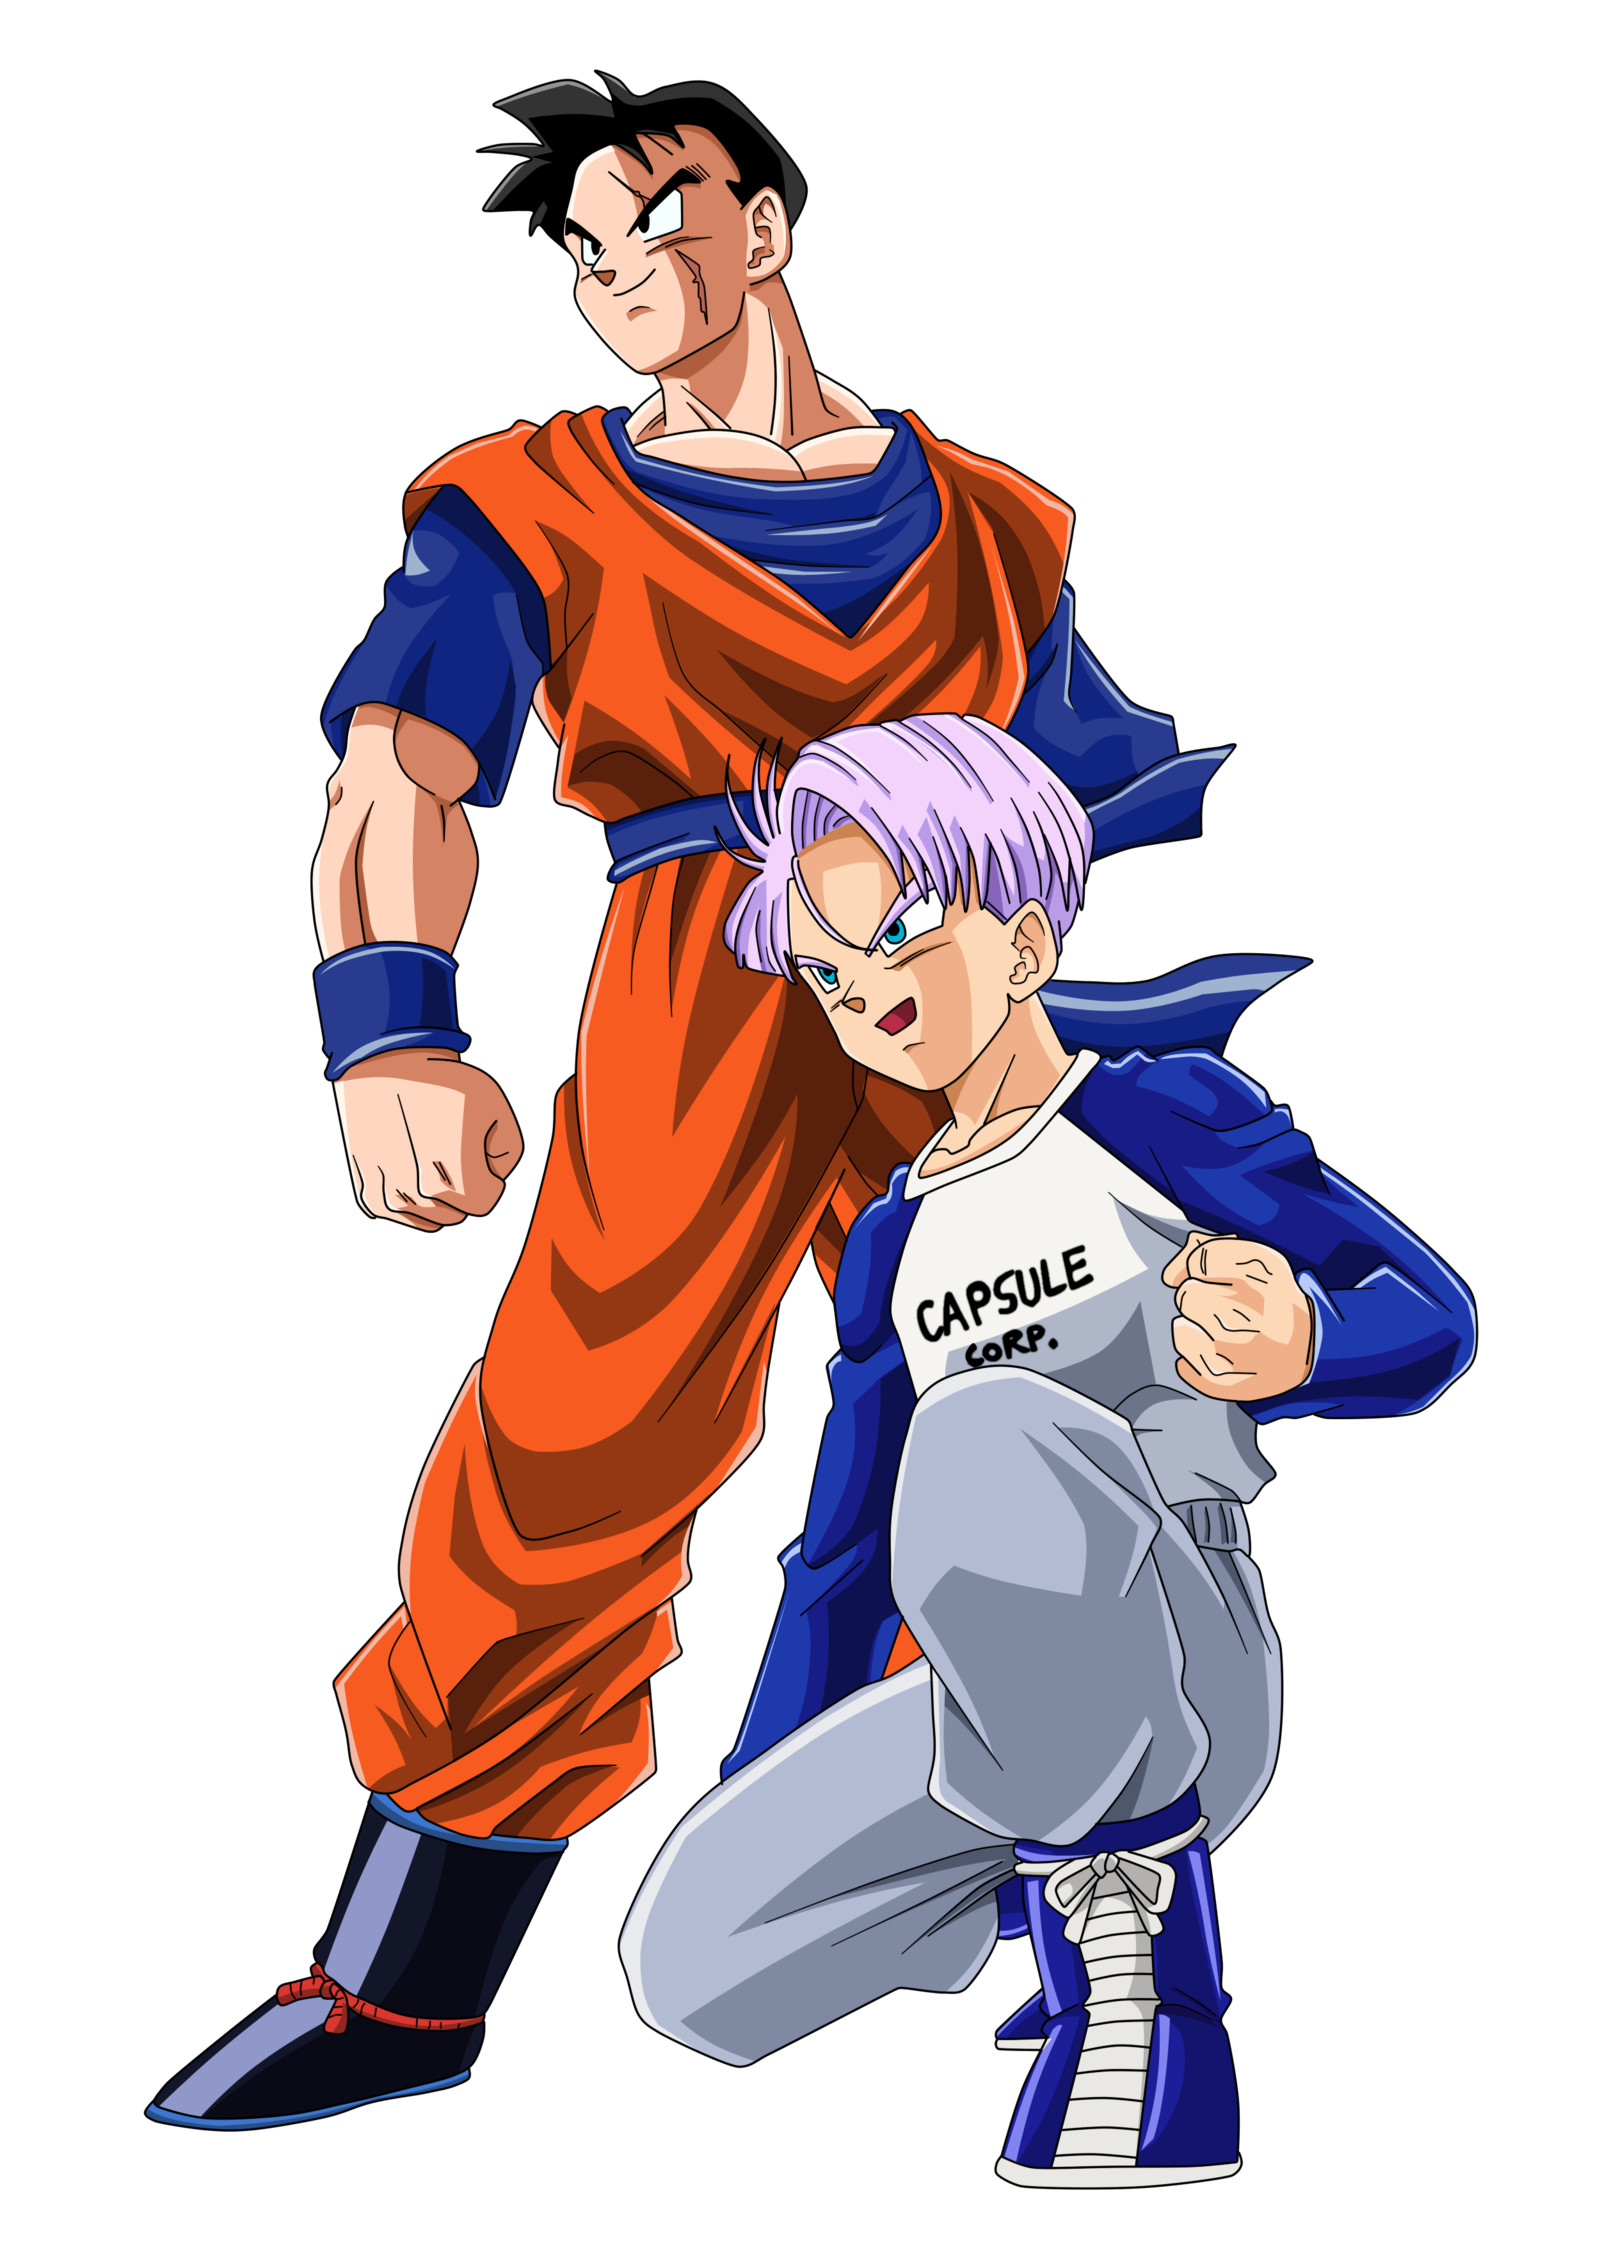 1600x2252 Future Gohan and Trunks Color by BoScha196 on DeviantArt - Visit now for 3D  Dragon Ball